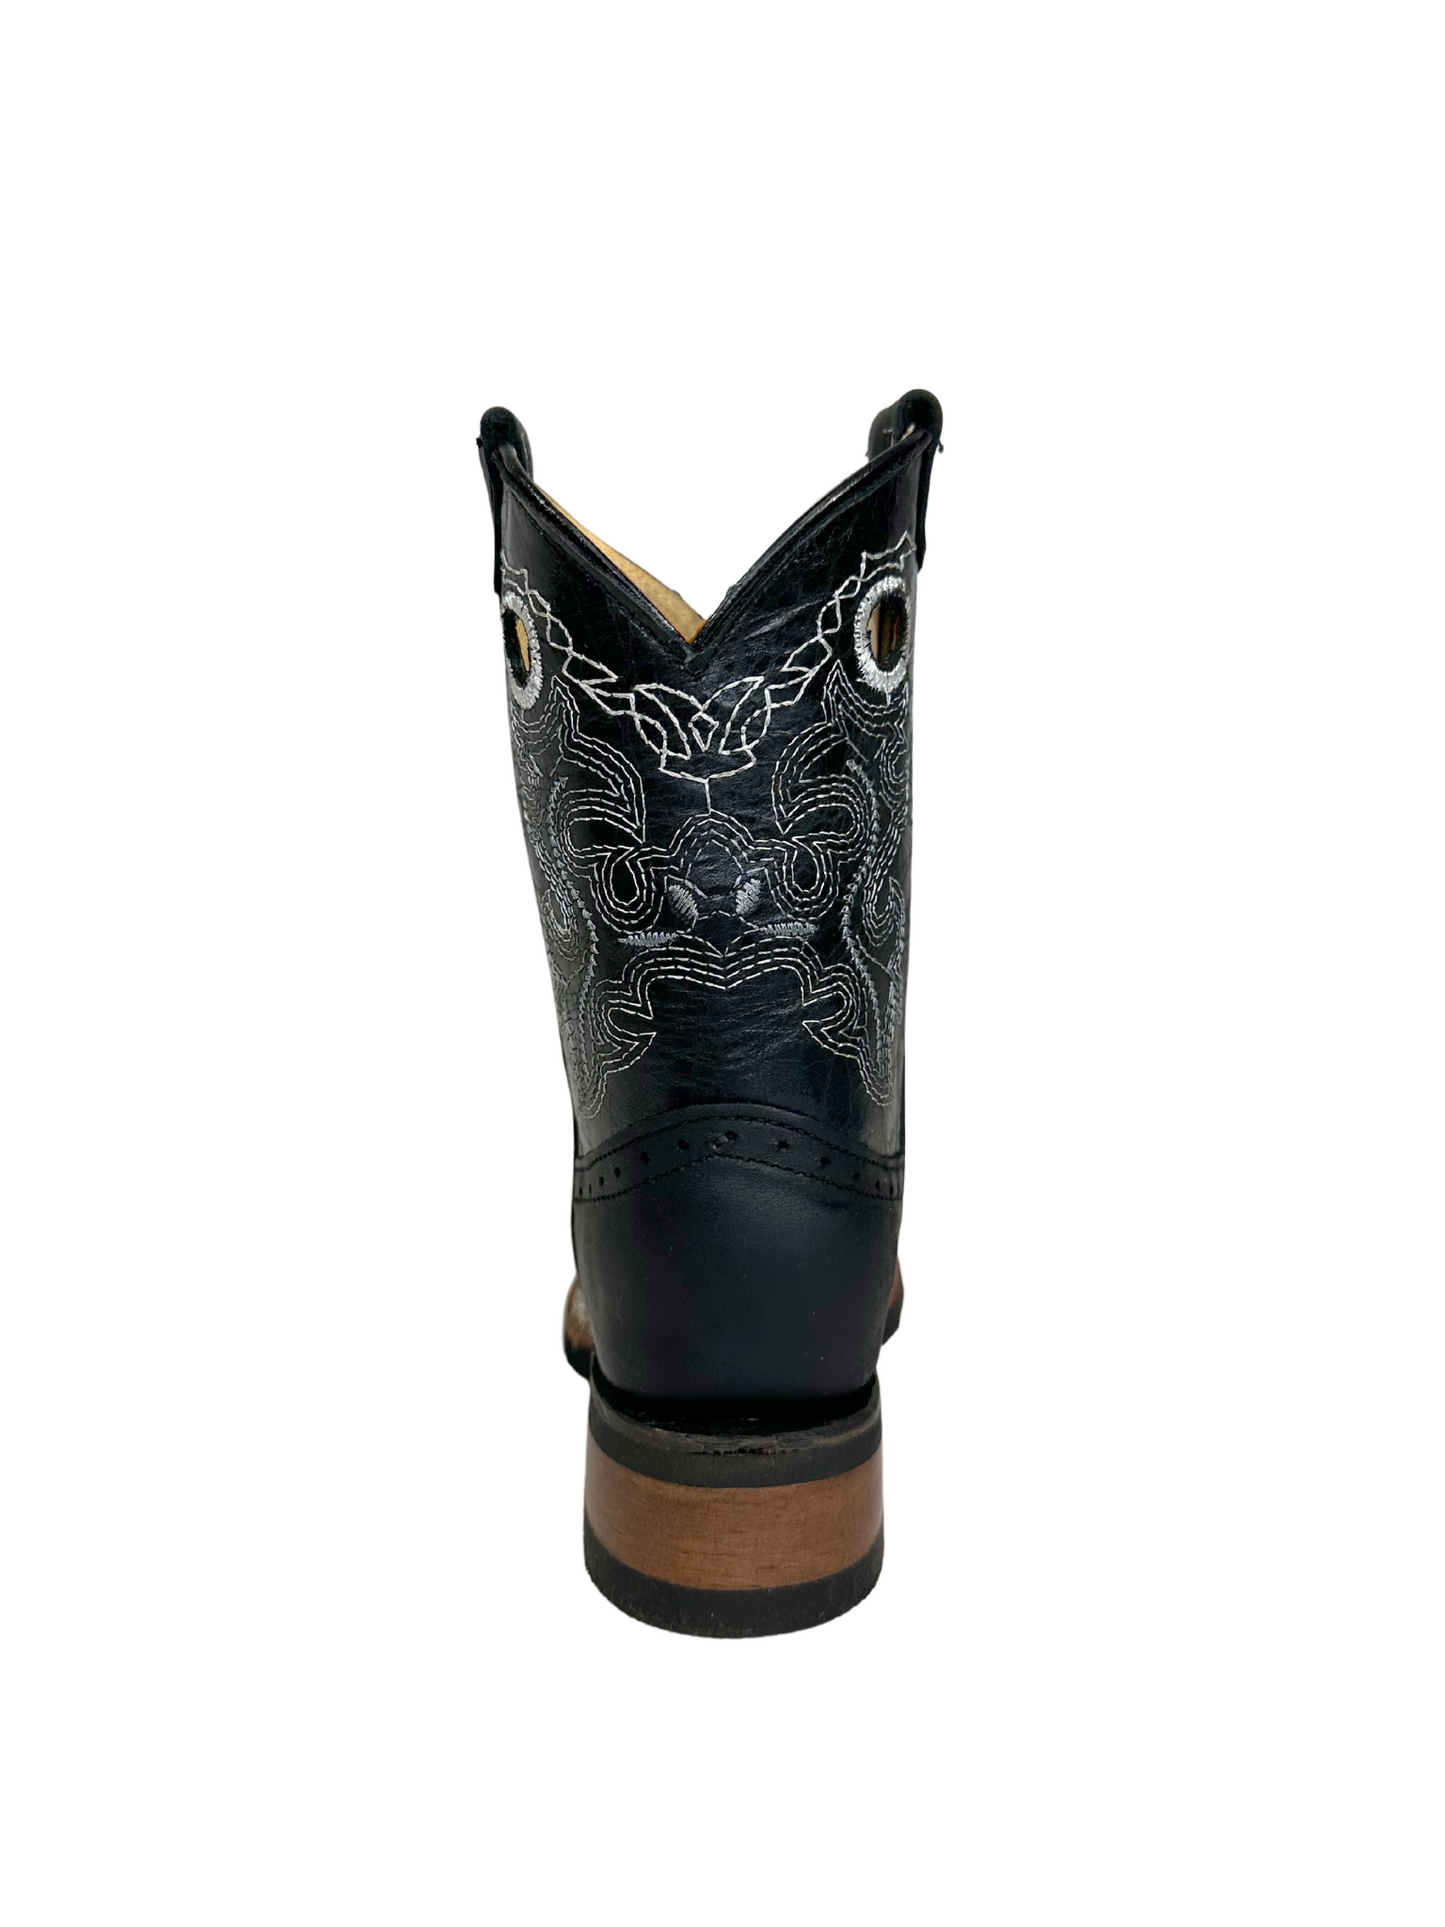 Quincy Kid's Black Leather Boot